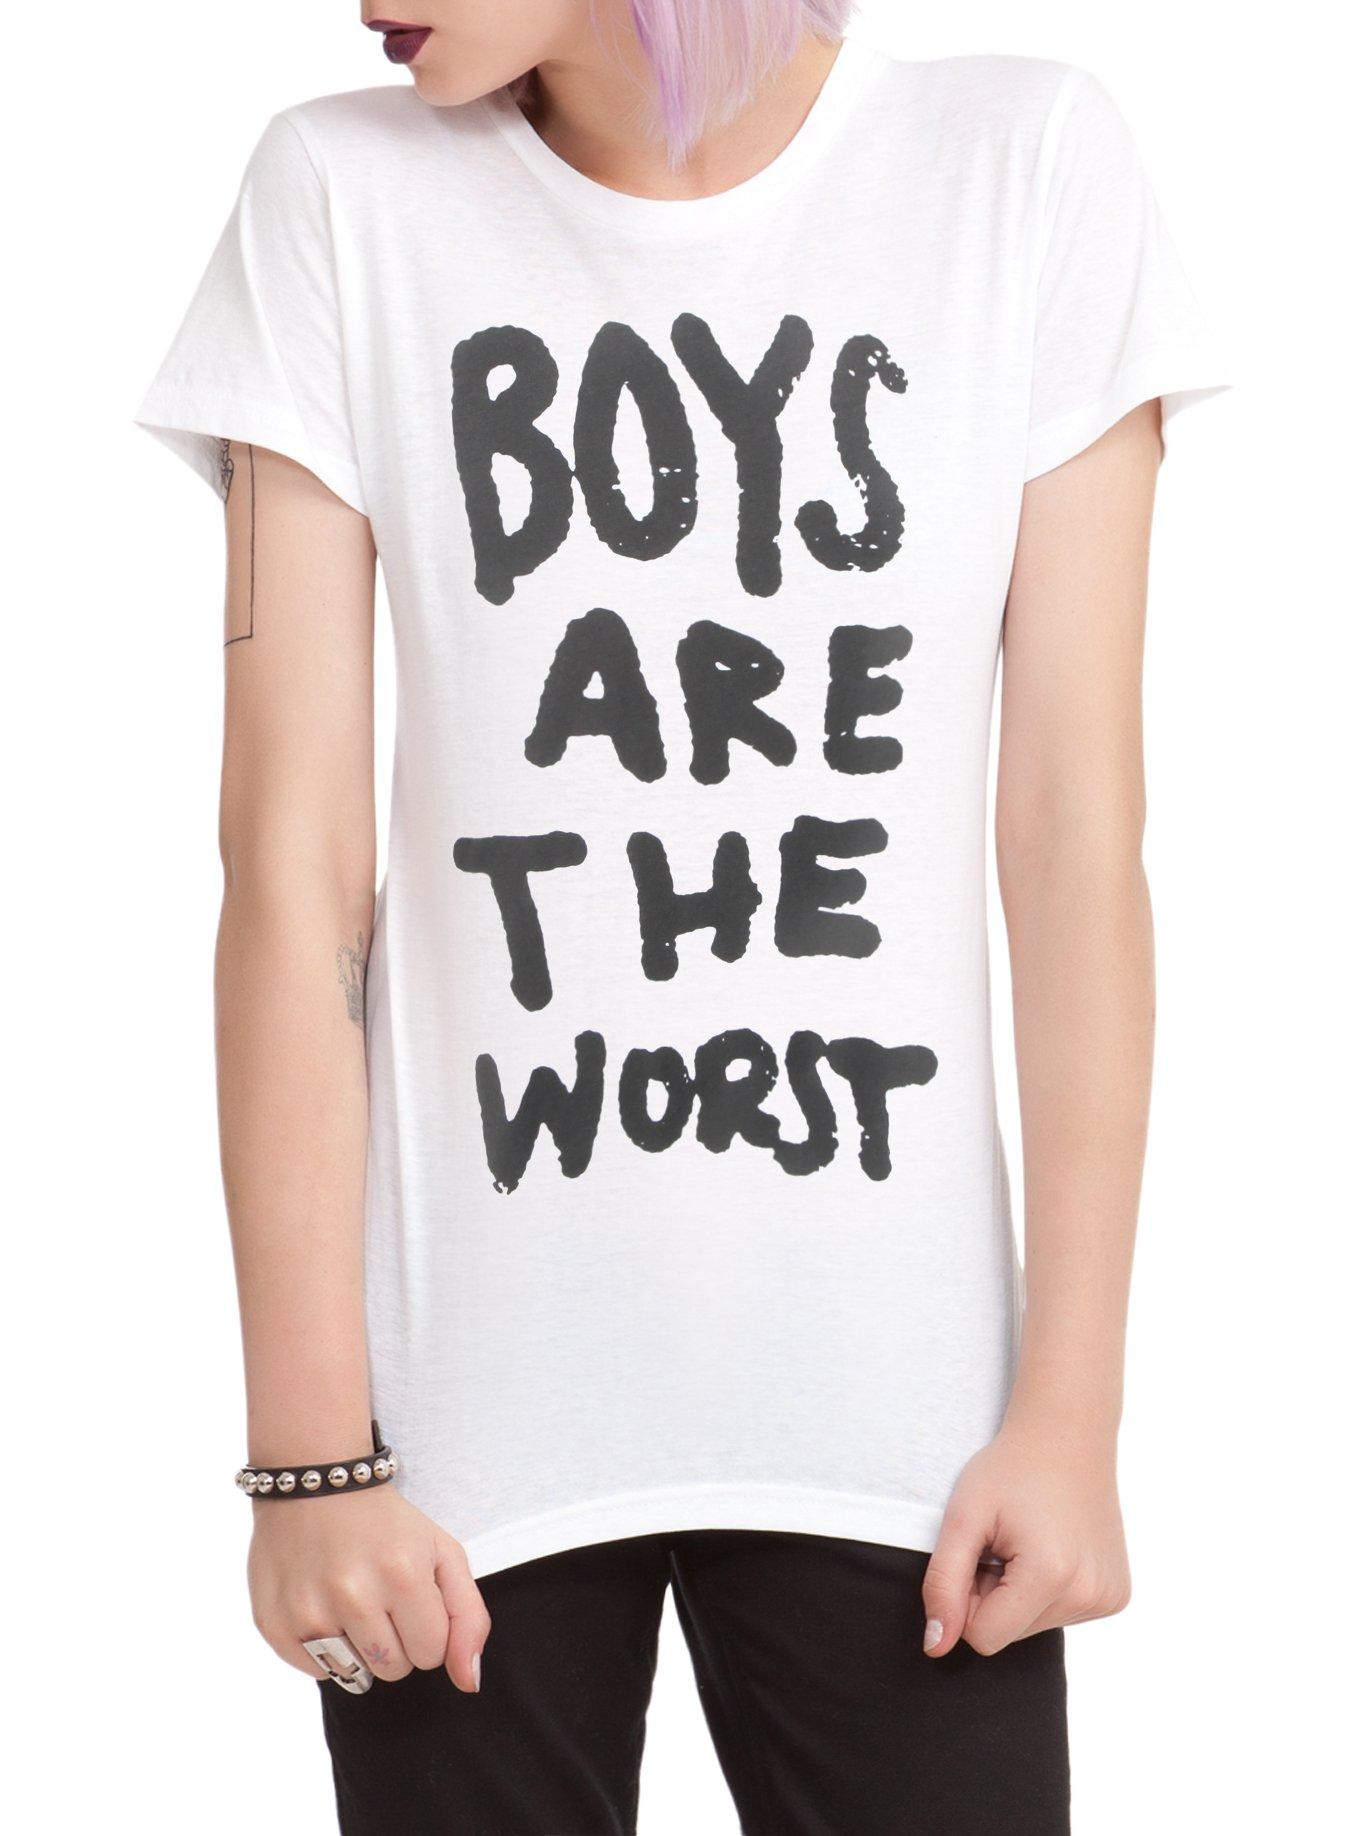 Teen Hearts Boys Are The Worst Girls T-Shirt, , hi-res